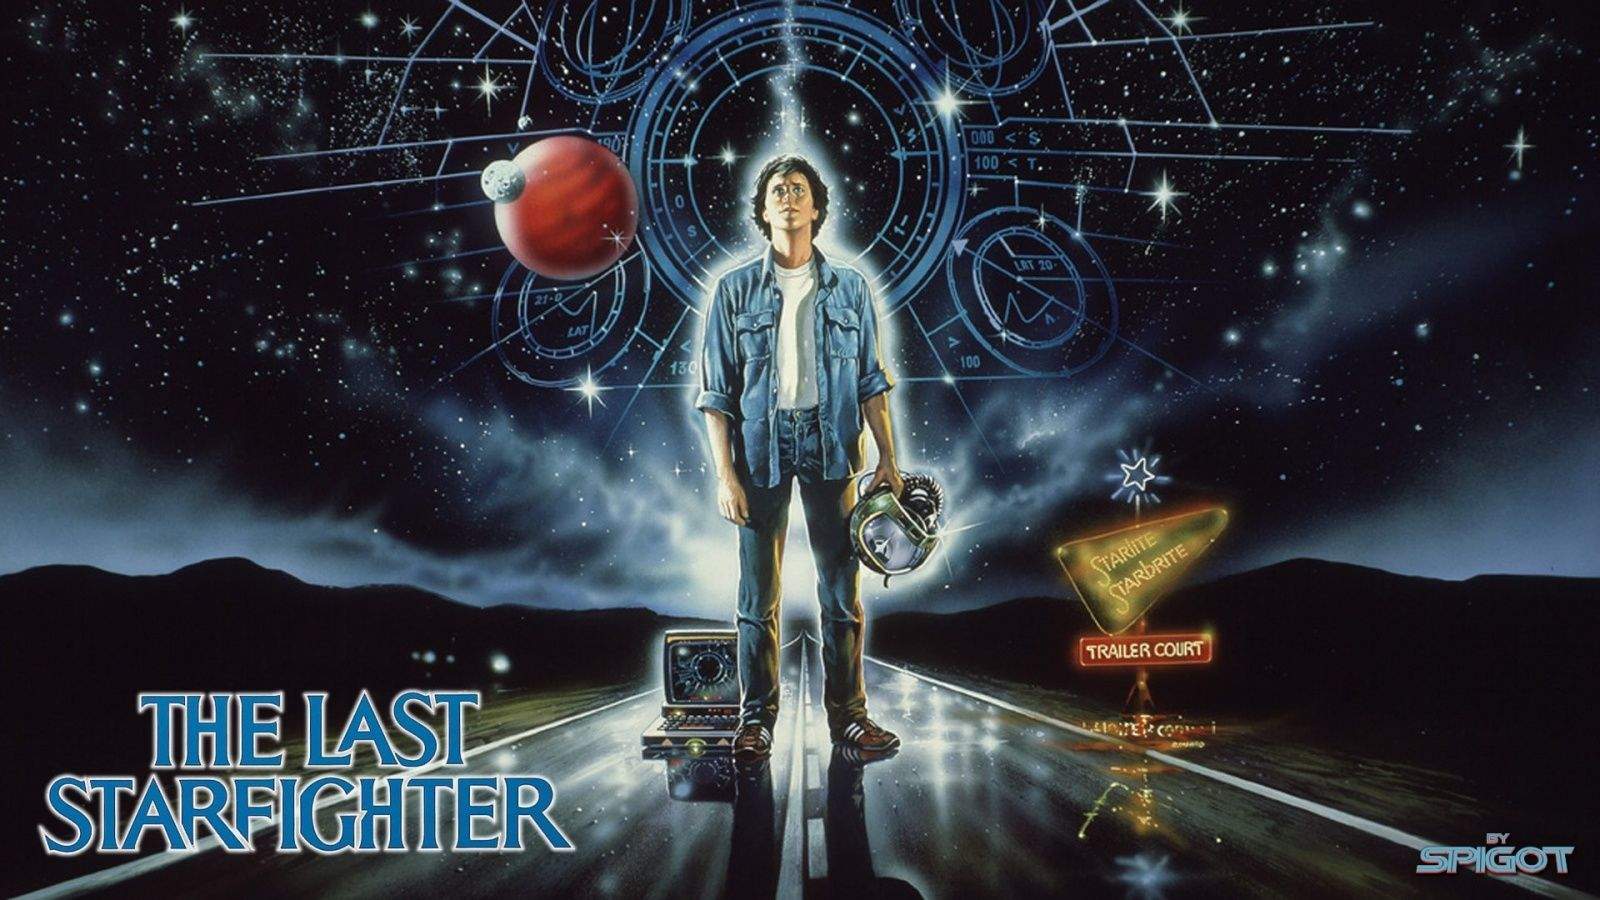 Pixar movies are all well and good (well, great), but I can’t help but miss the kind of kid’s movies that did the rounds in the 1980s. Of these, The Last Starfighter was a favorite -- and it’s definitely prime material for a reboot.The movie tells the story of Alex Rogan, an average teen boy who’s recruited by an alien defense force to help fight in an interstellar war, all because of his skill at the Starfighter arcade game. It was essentially a Star Wars ripoff, but it was one of the best ones, and among the first films to feature CGI graphics.Three decades after the movie’s 1984 release, video games have moved on a lot, but The Last Starfighter's key ingredients would be great in a refresh for the Oculus Rift generation. Today’s photo-realistic graphics and immersive VR environments would also open the doors for a blurring between fantasy and reality, making this a cross between The Last Starfighter and Total Recall.